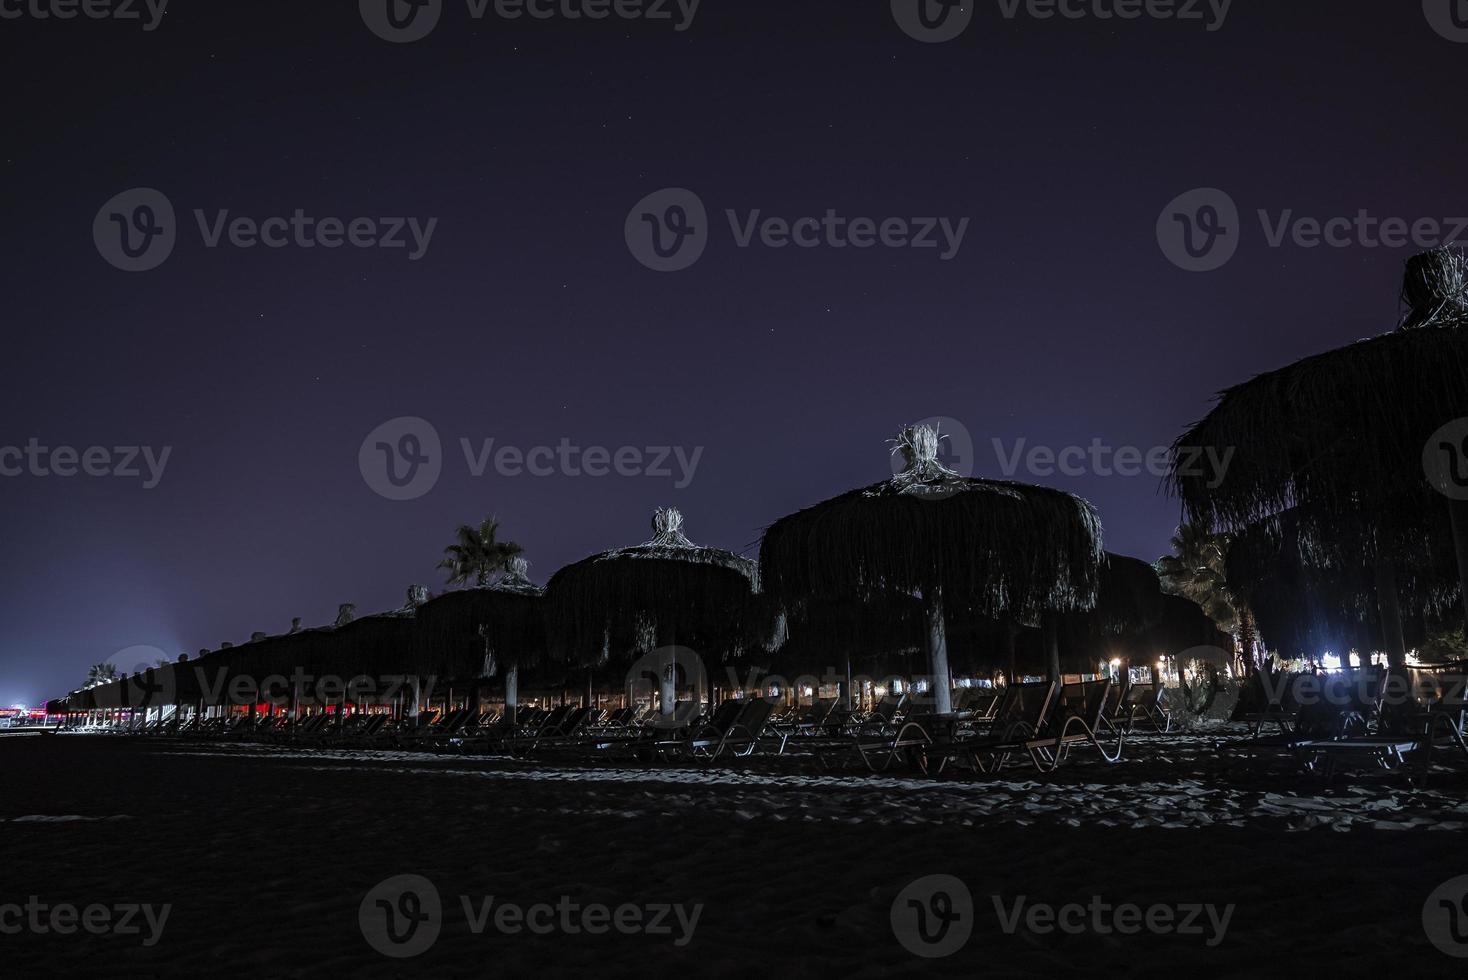 Empty deckchairs and thatched umbrellas arranged on beach at night photo